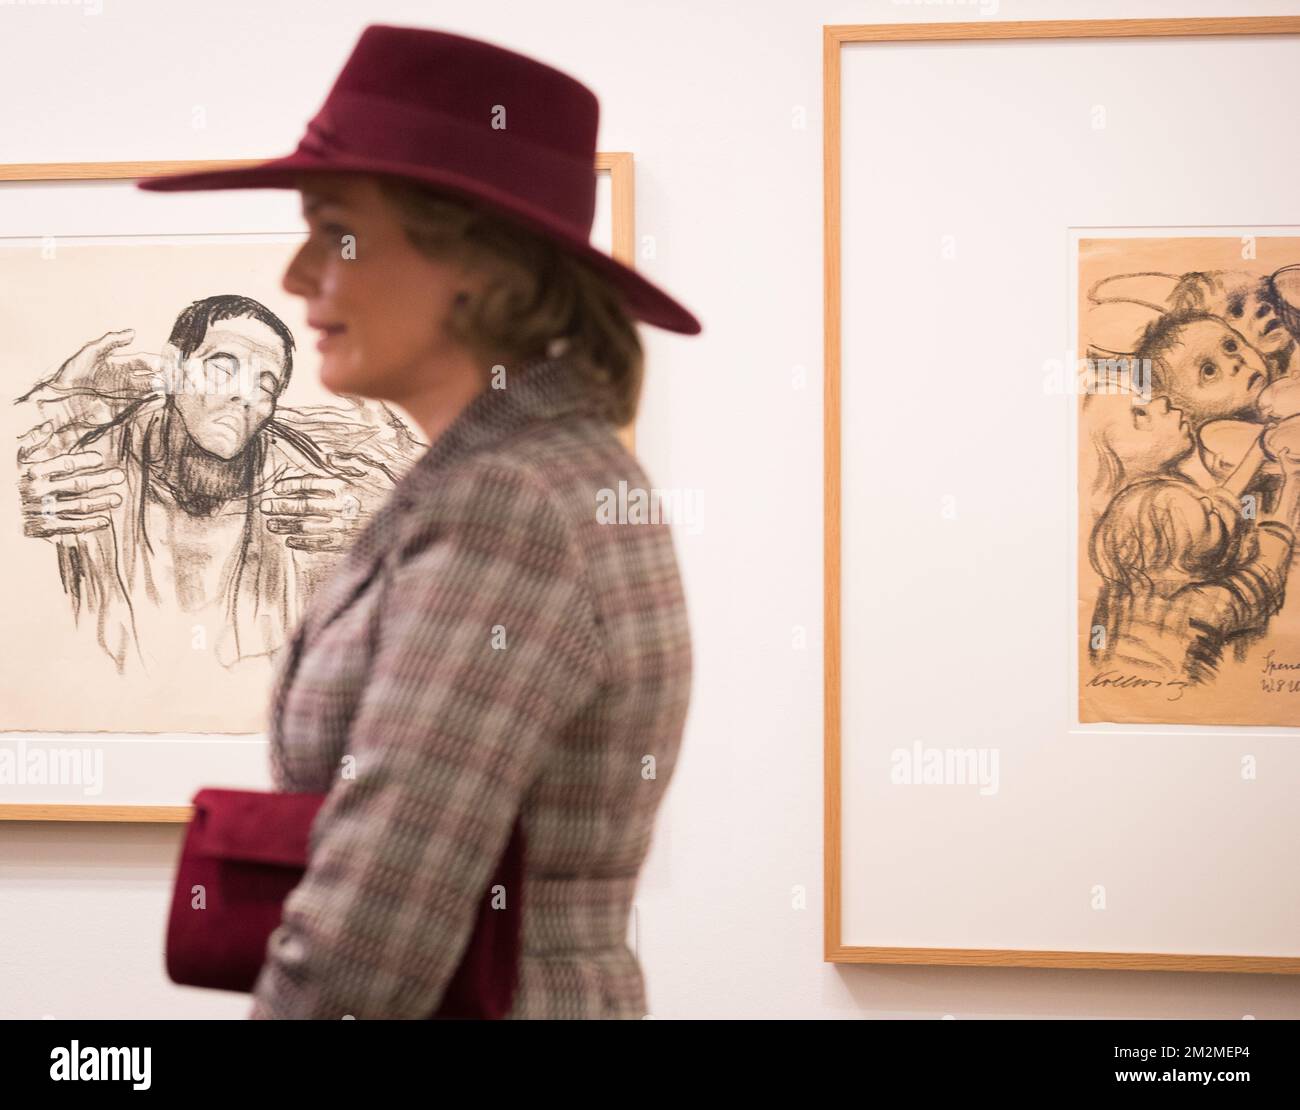 Queen Mathilde of Belgium pictured during a visit to the Museum Kathe Kollwitz during a one day visit of the Belgian royal couple in Berlin, Germany, part of the commemorations for the 100th anniversary of the end of World War One, Friday 23 November 2018. BELGA PHOTO BENOIT DOPPAGNE Stock Photo